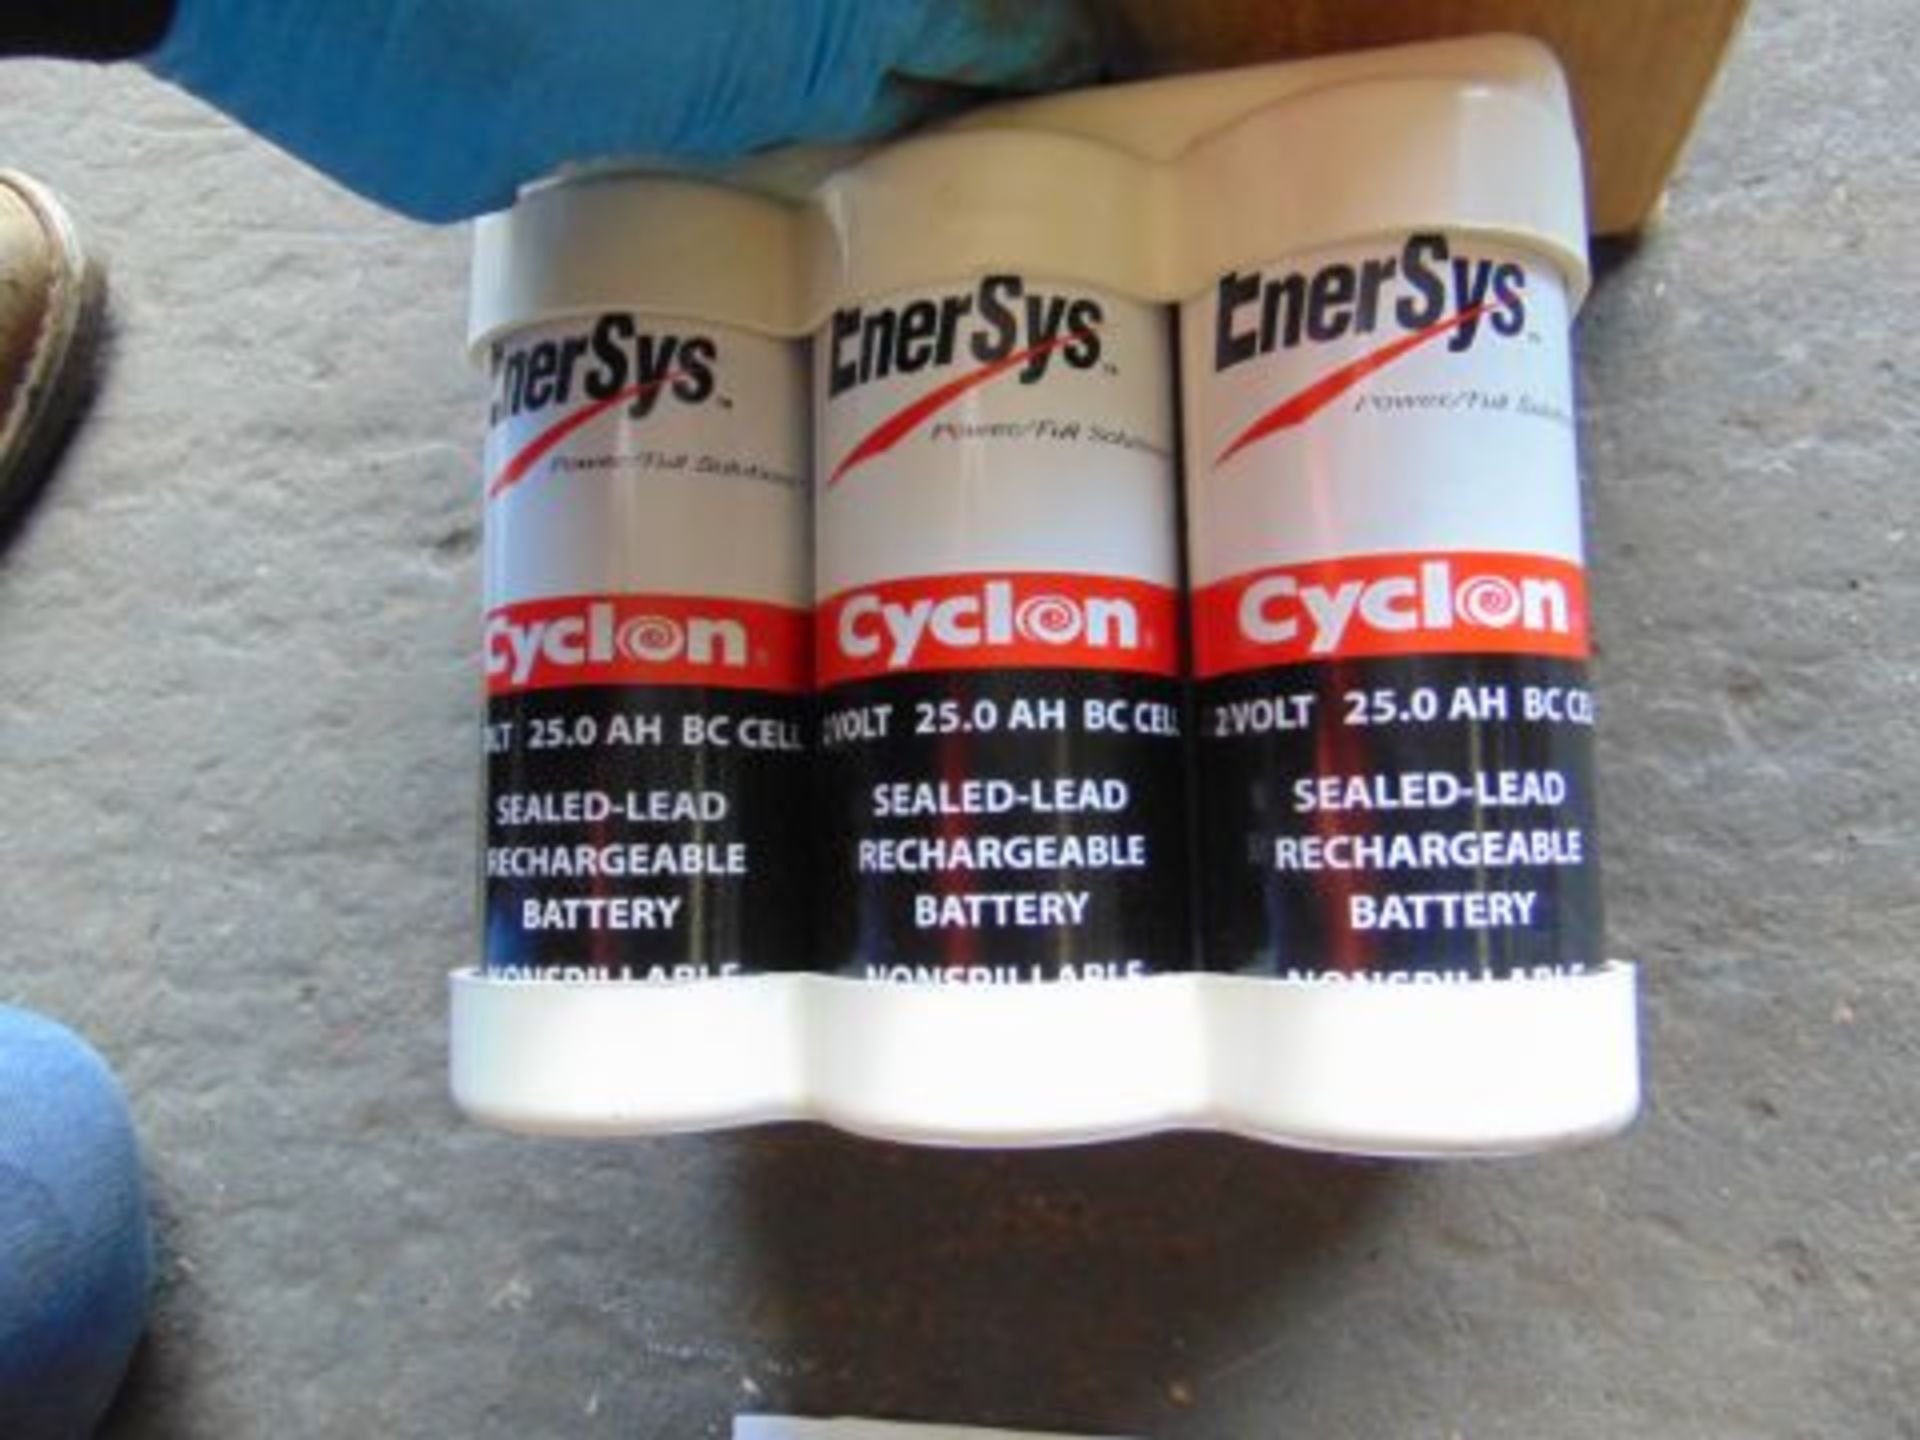 2x Unissued Enersys 2 volt per cell x6 Rechargeable Batteries in Original Packing - Image 3 of 4